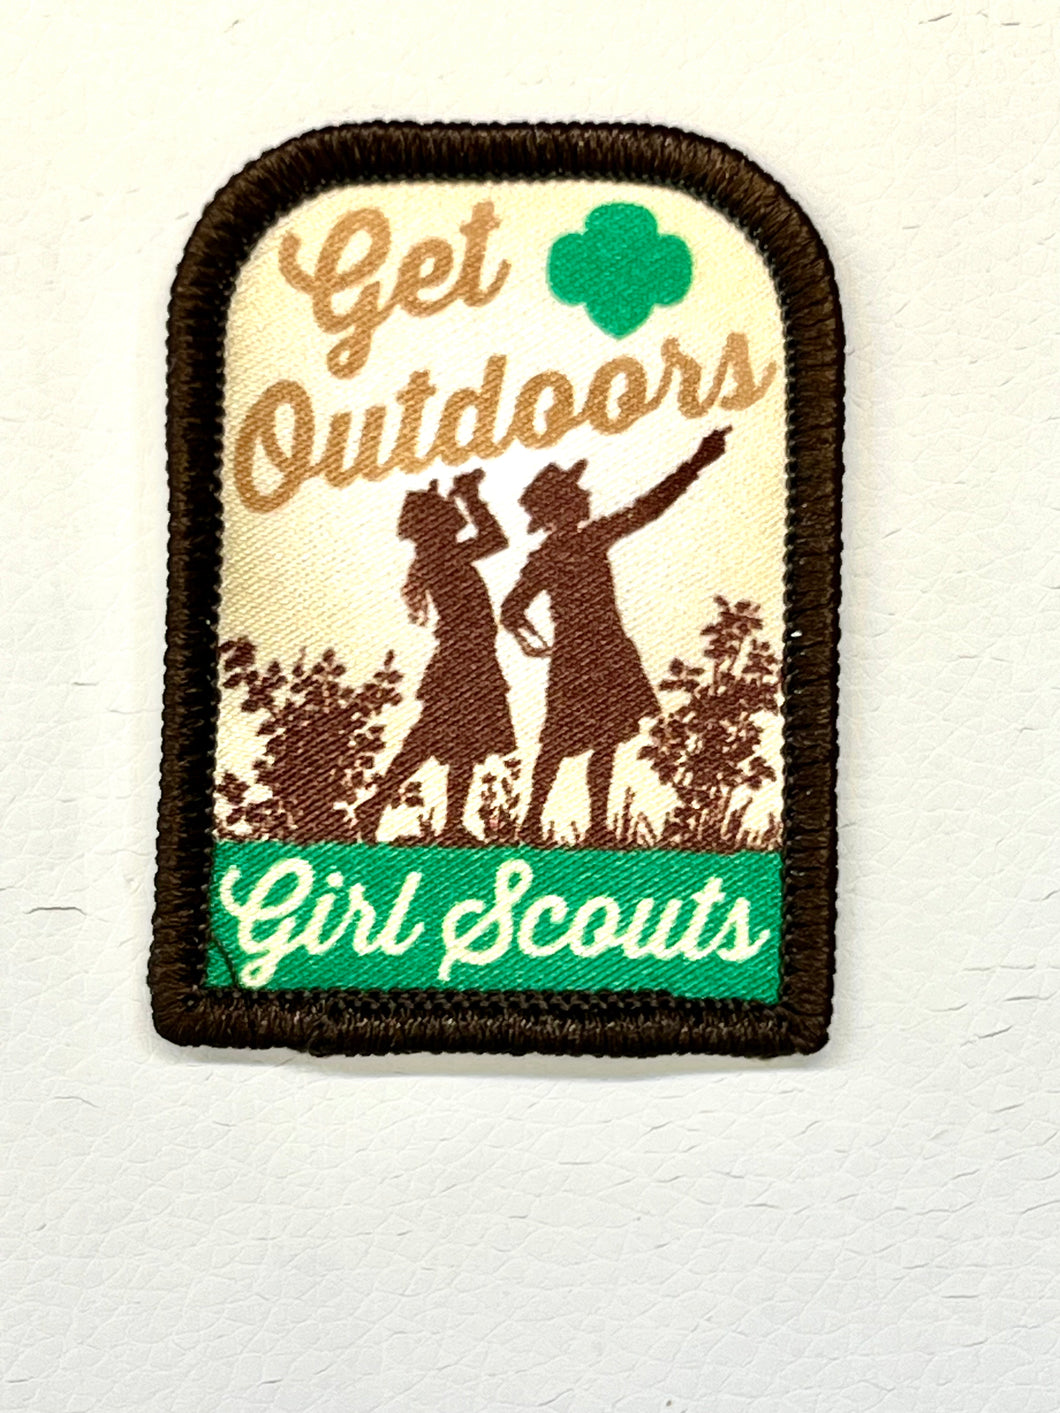 Girl Scouts vintage get outdoors sew-on patch